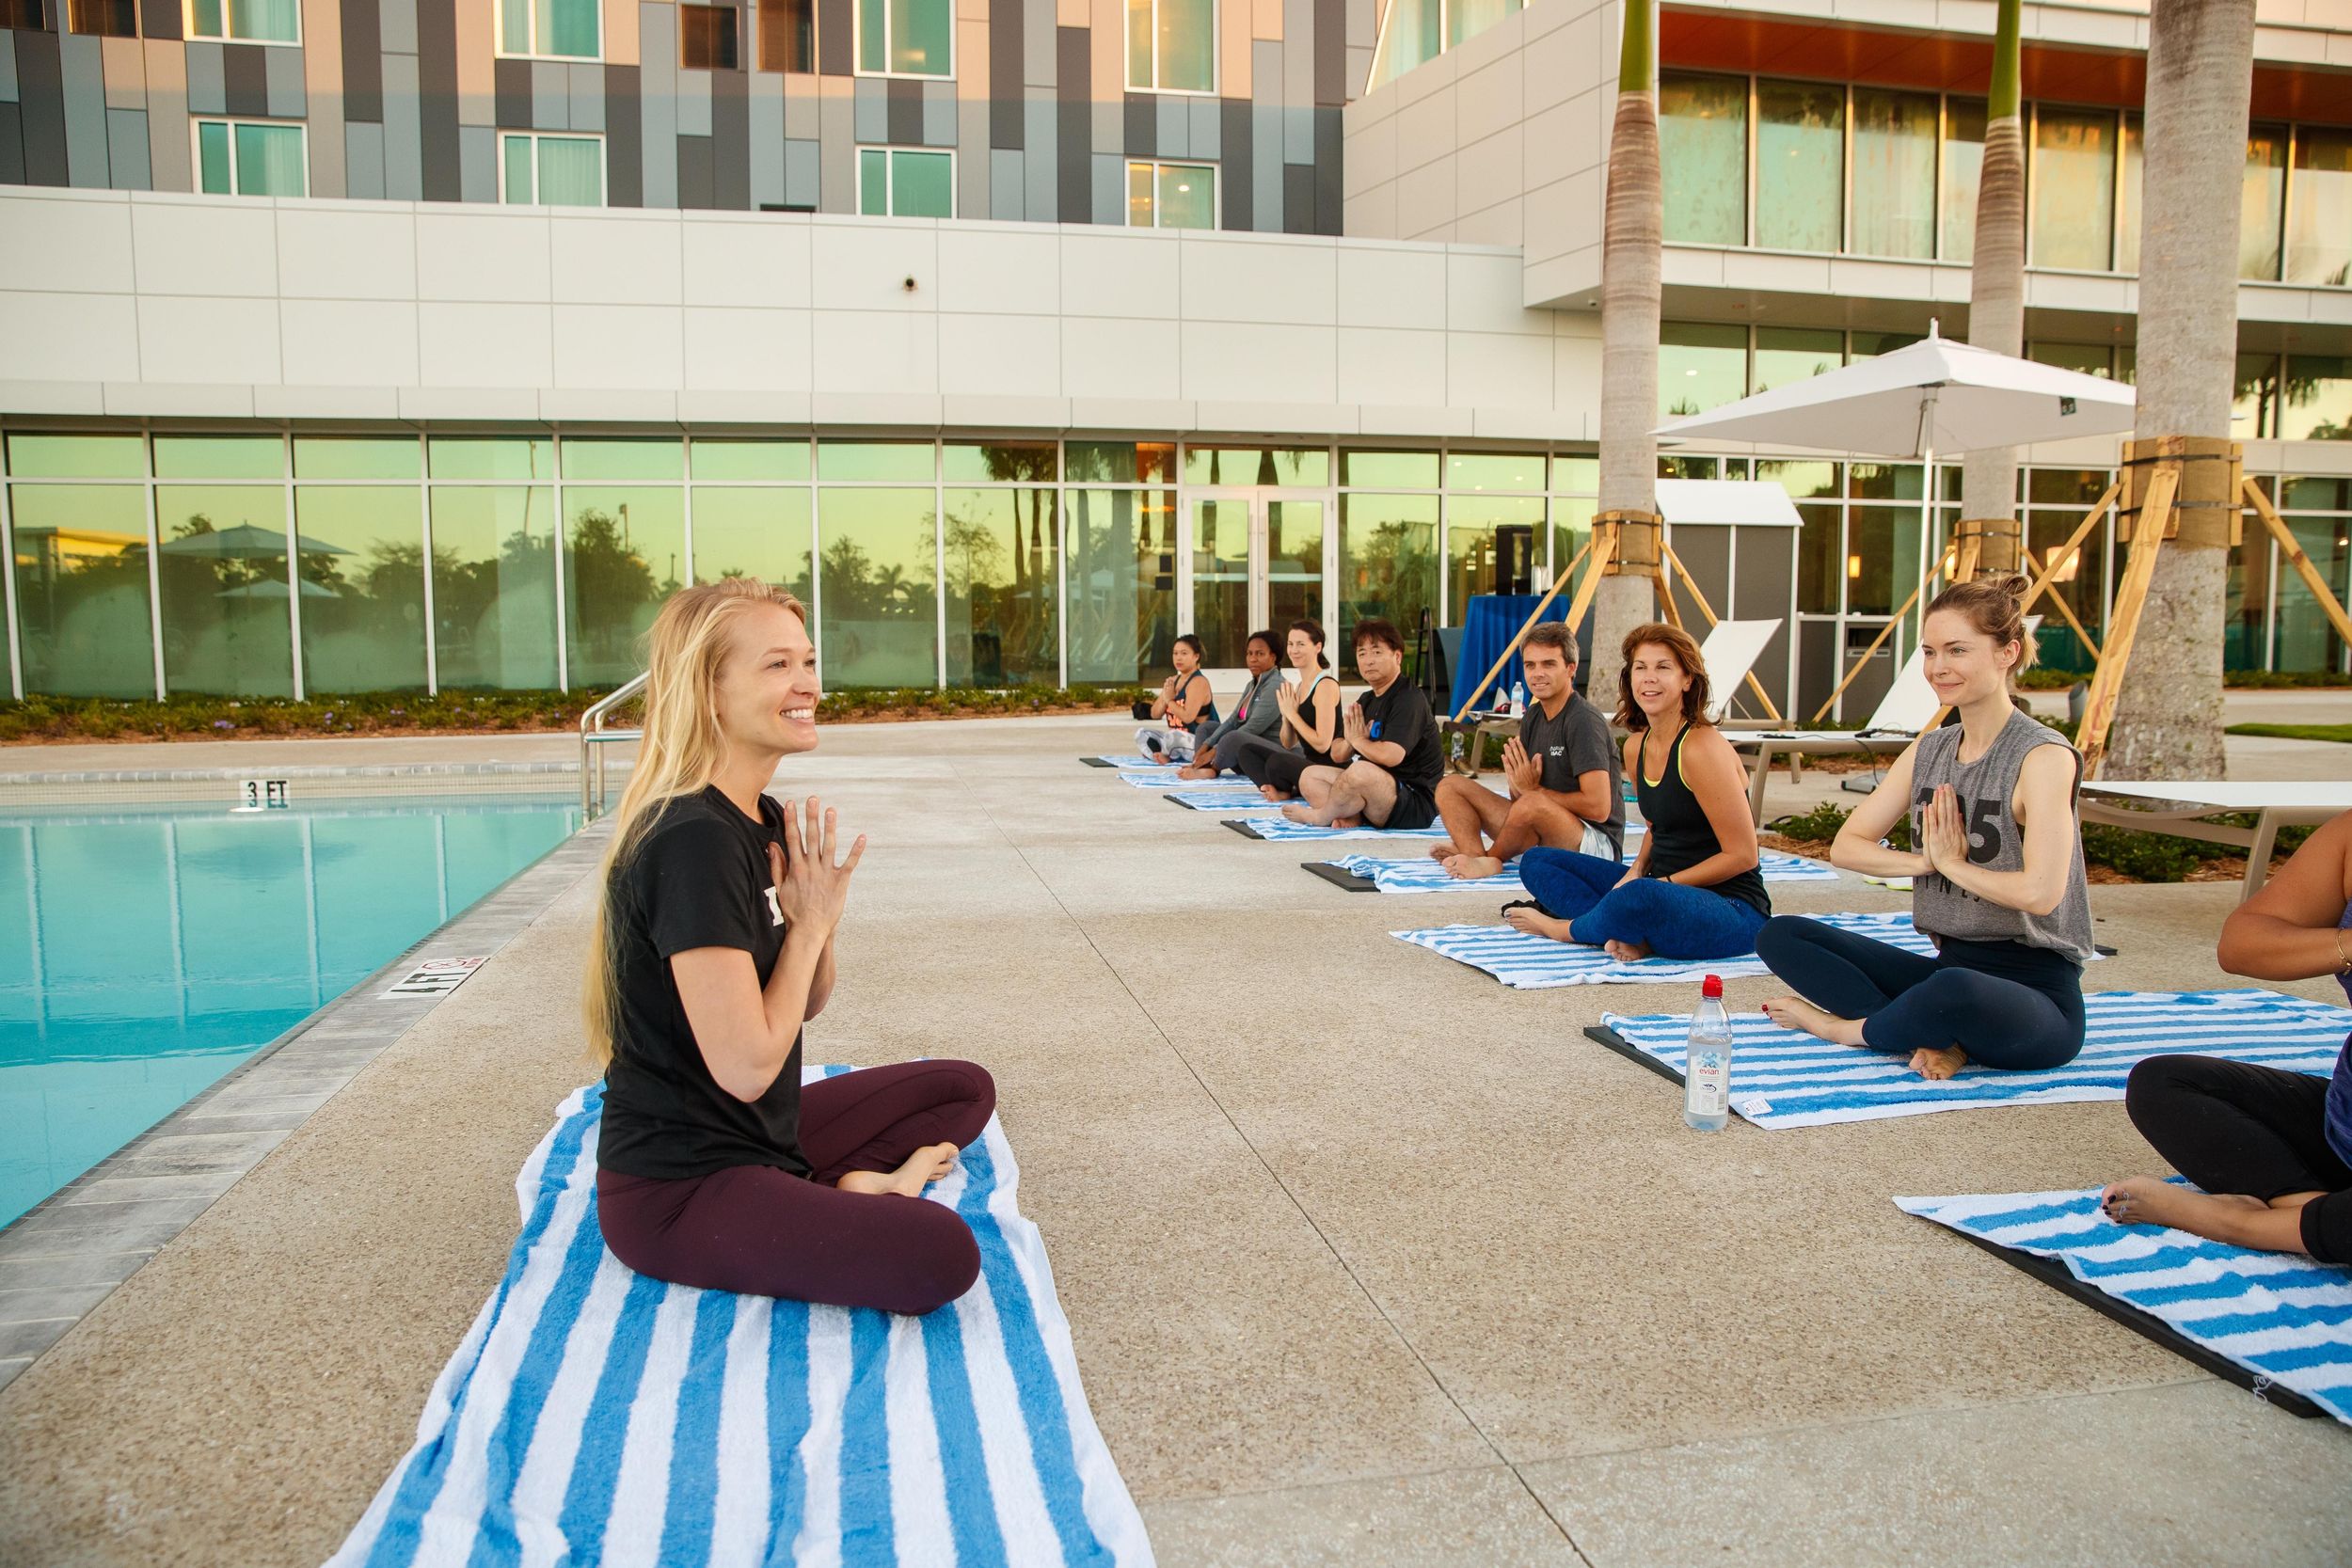 A group of people take a yoga class by a hotel pool outside.